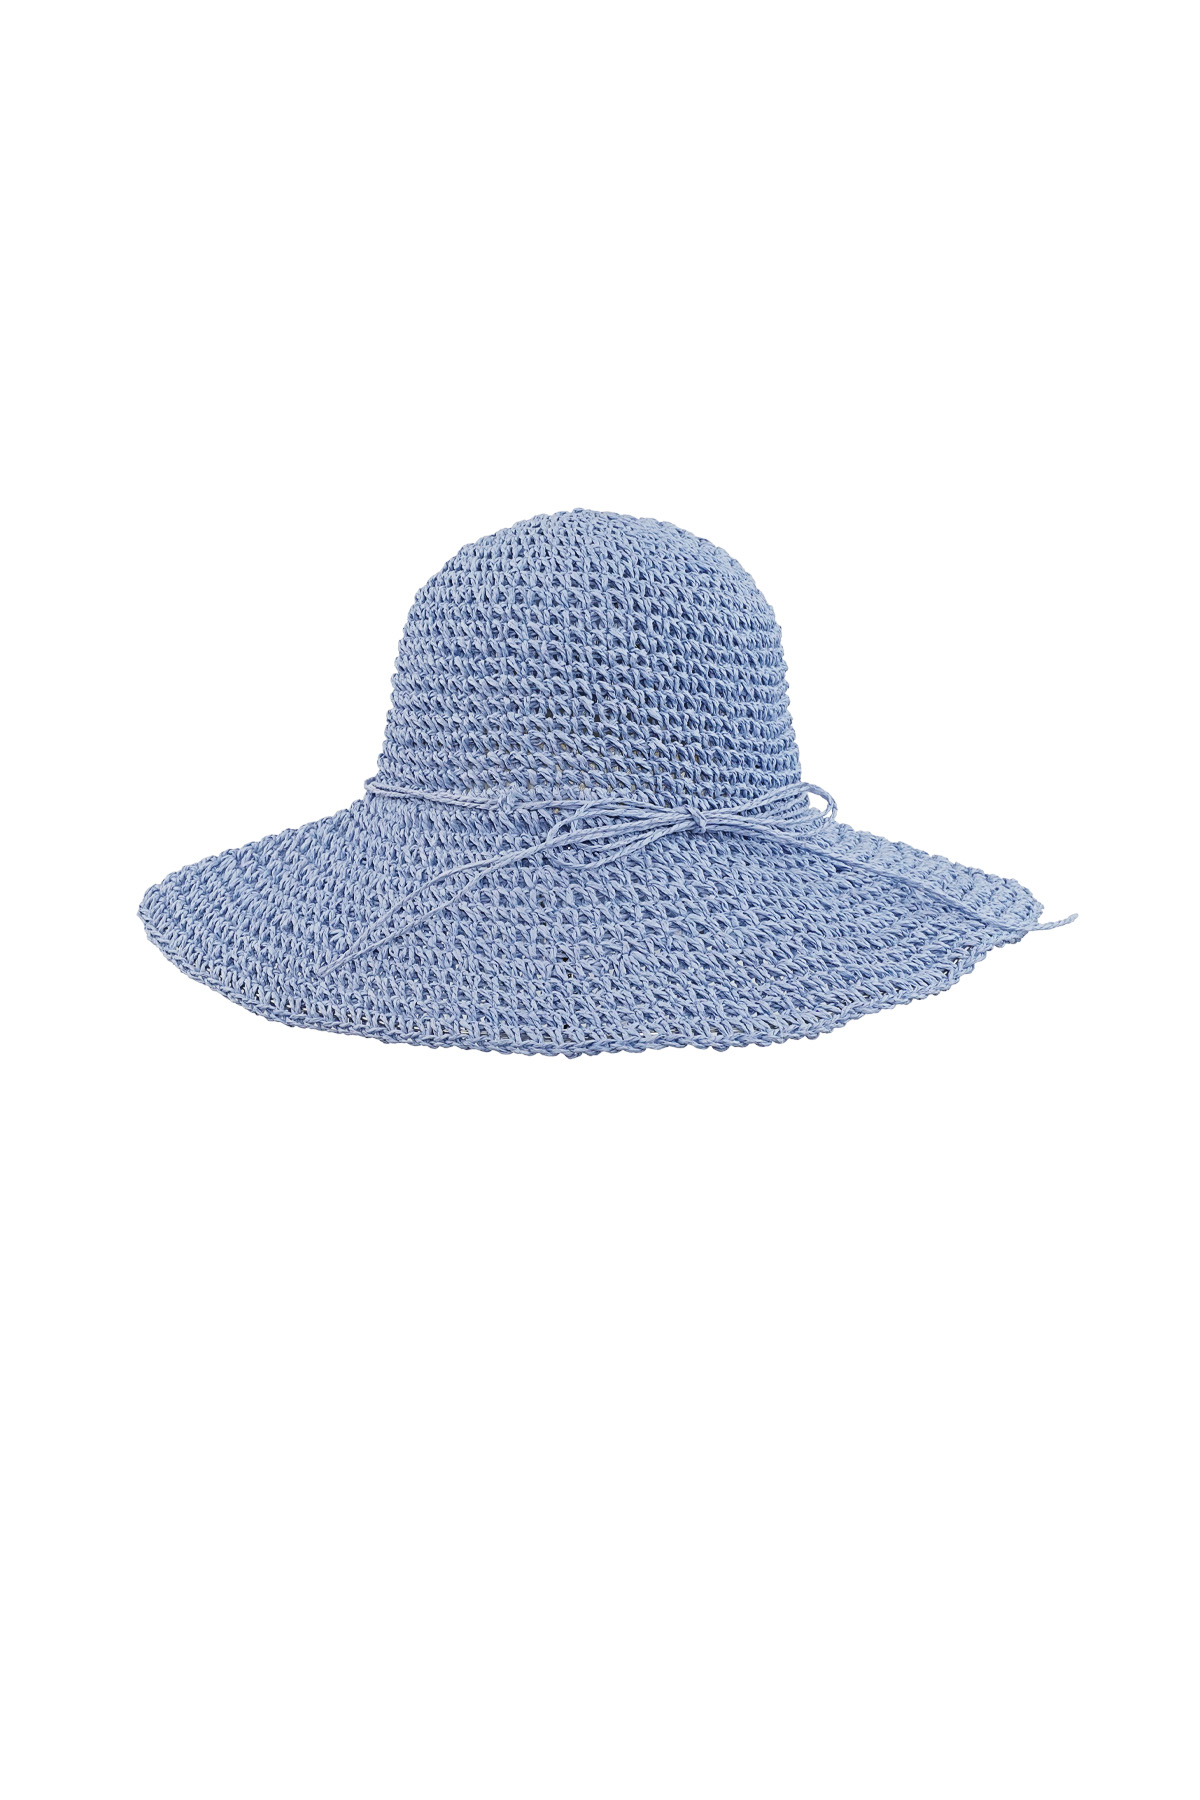 Crochet hat with bow - blue